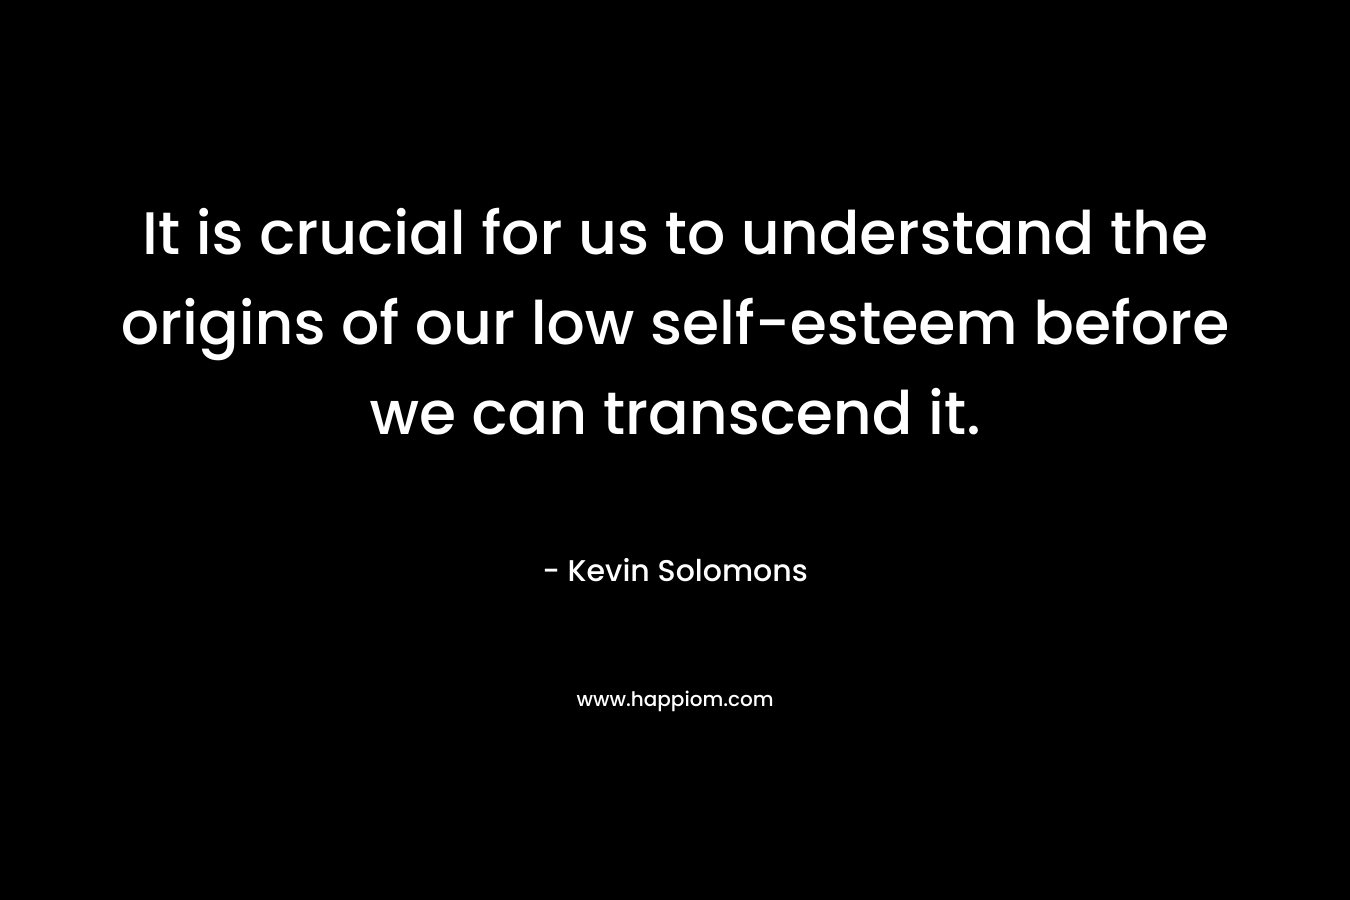 It is crucial for us to understand the origins of our low self-esteem before we can transcend it. – Kevin Solomons